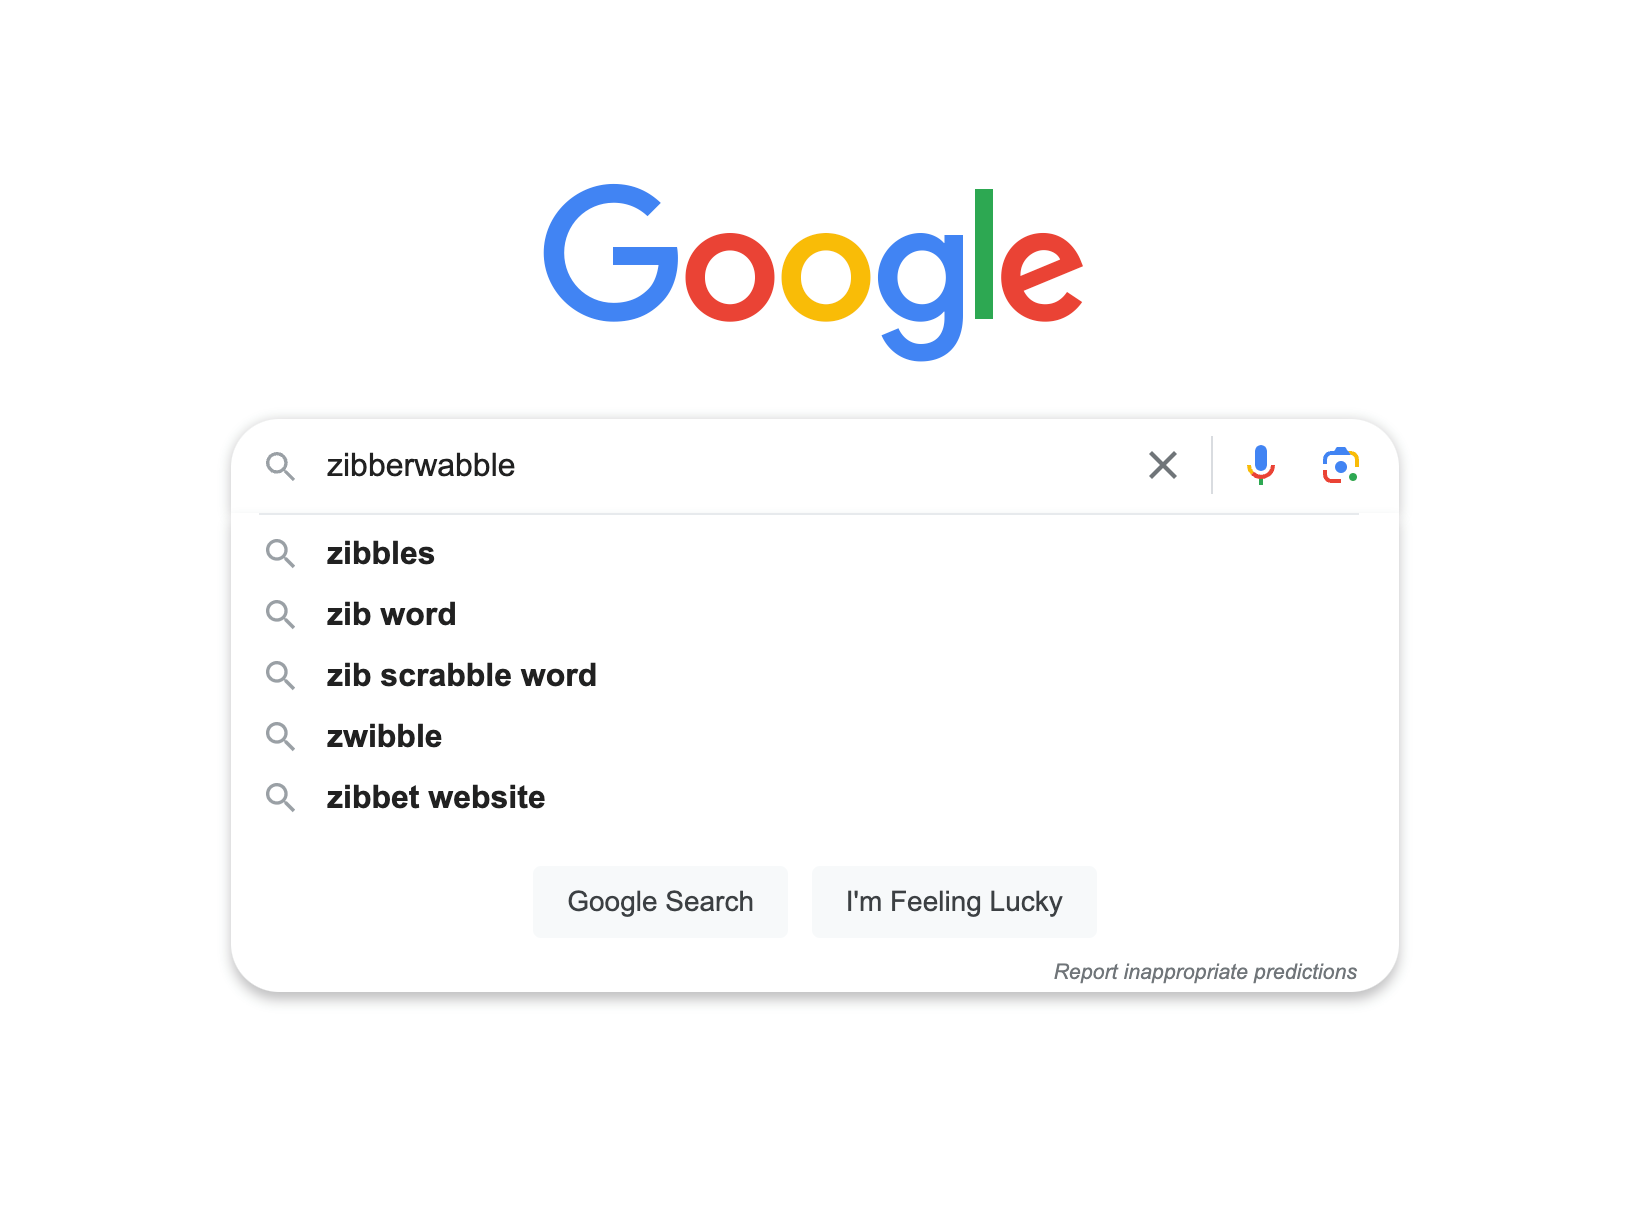 Google autocomplete for Zibberwabble... nothing shows up